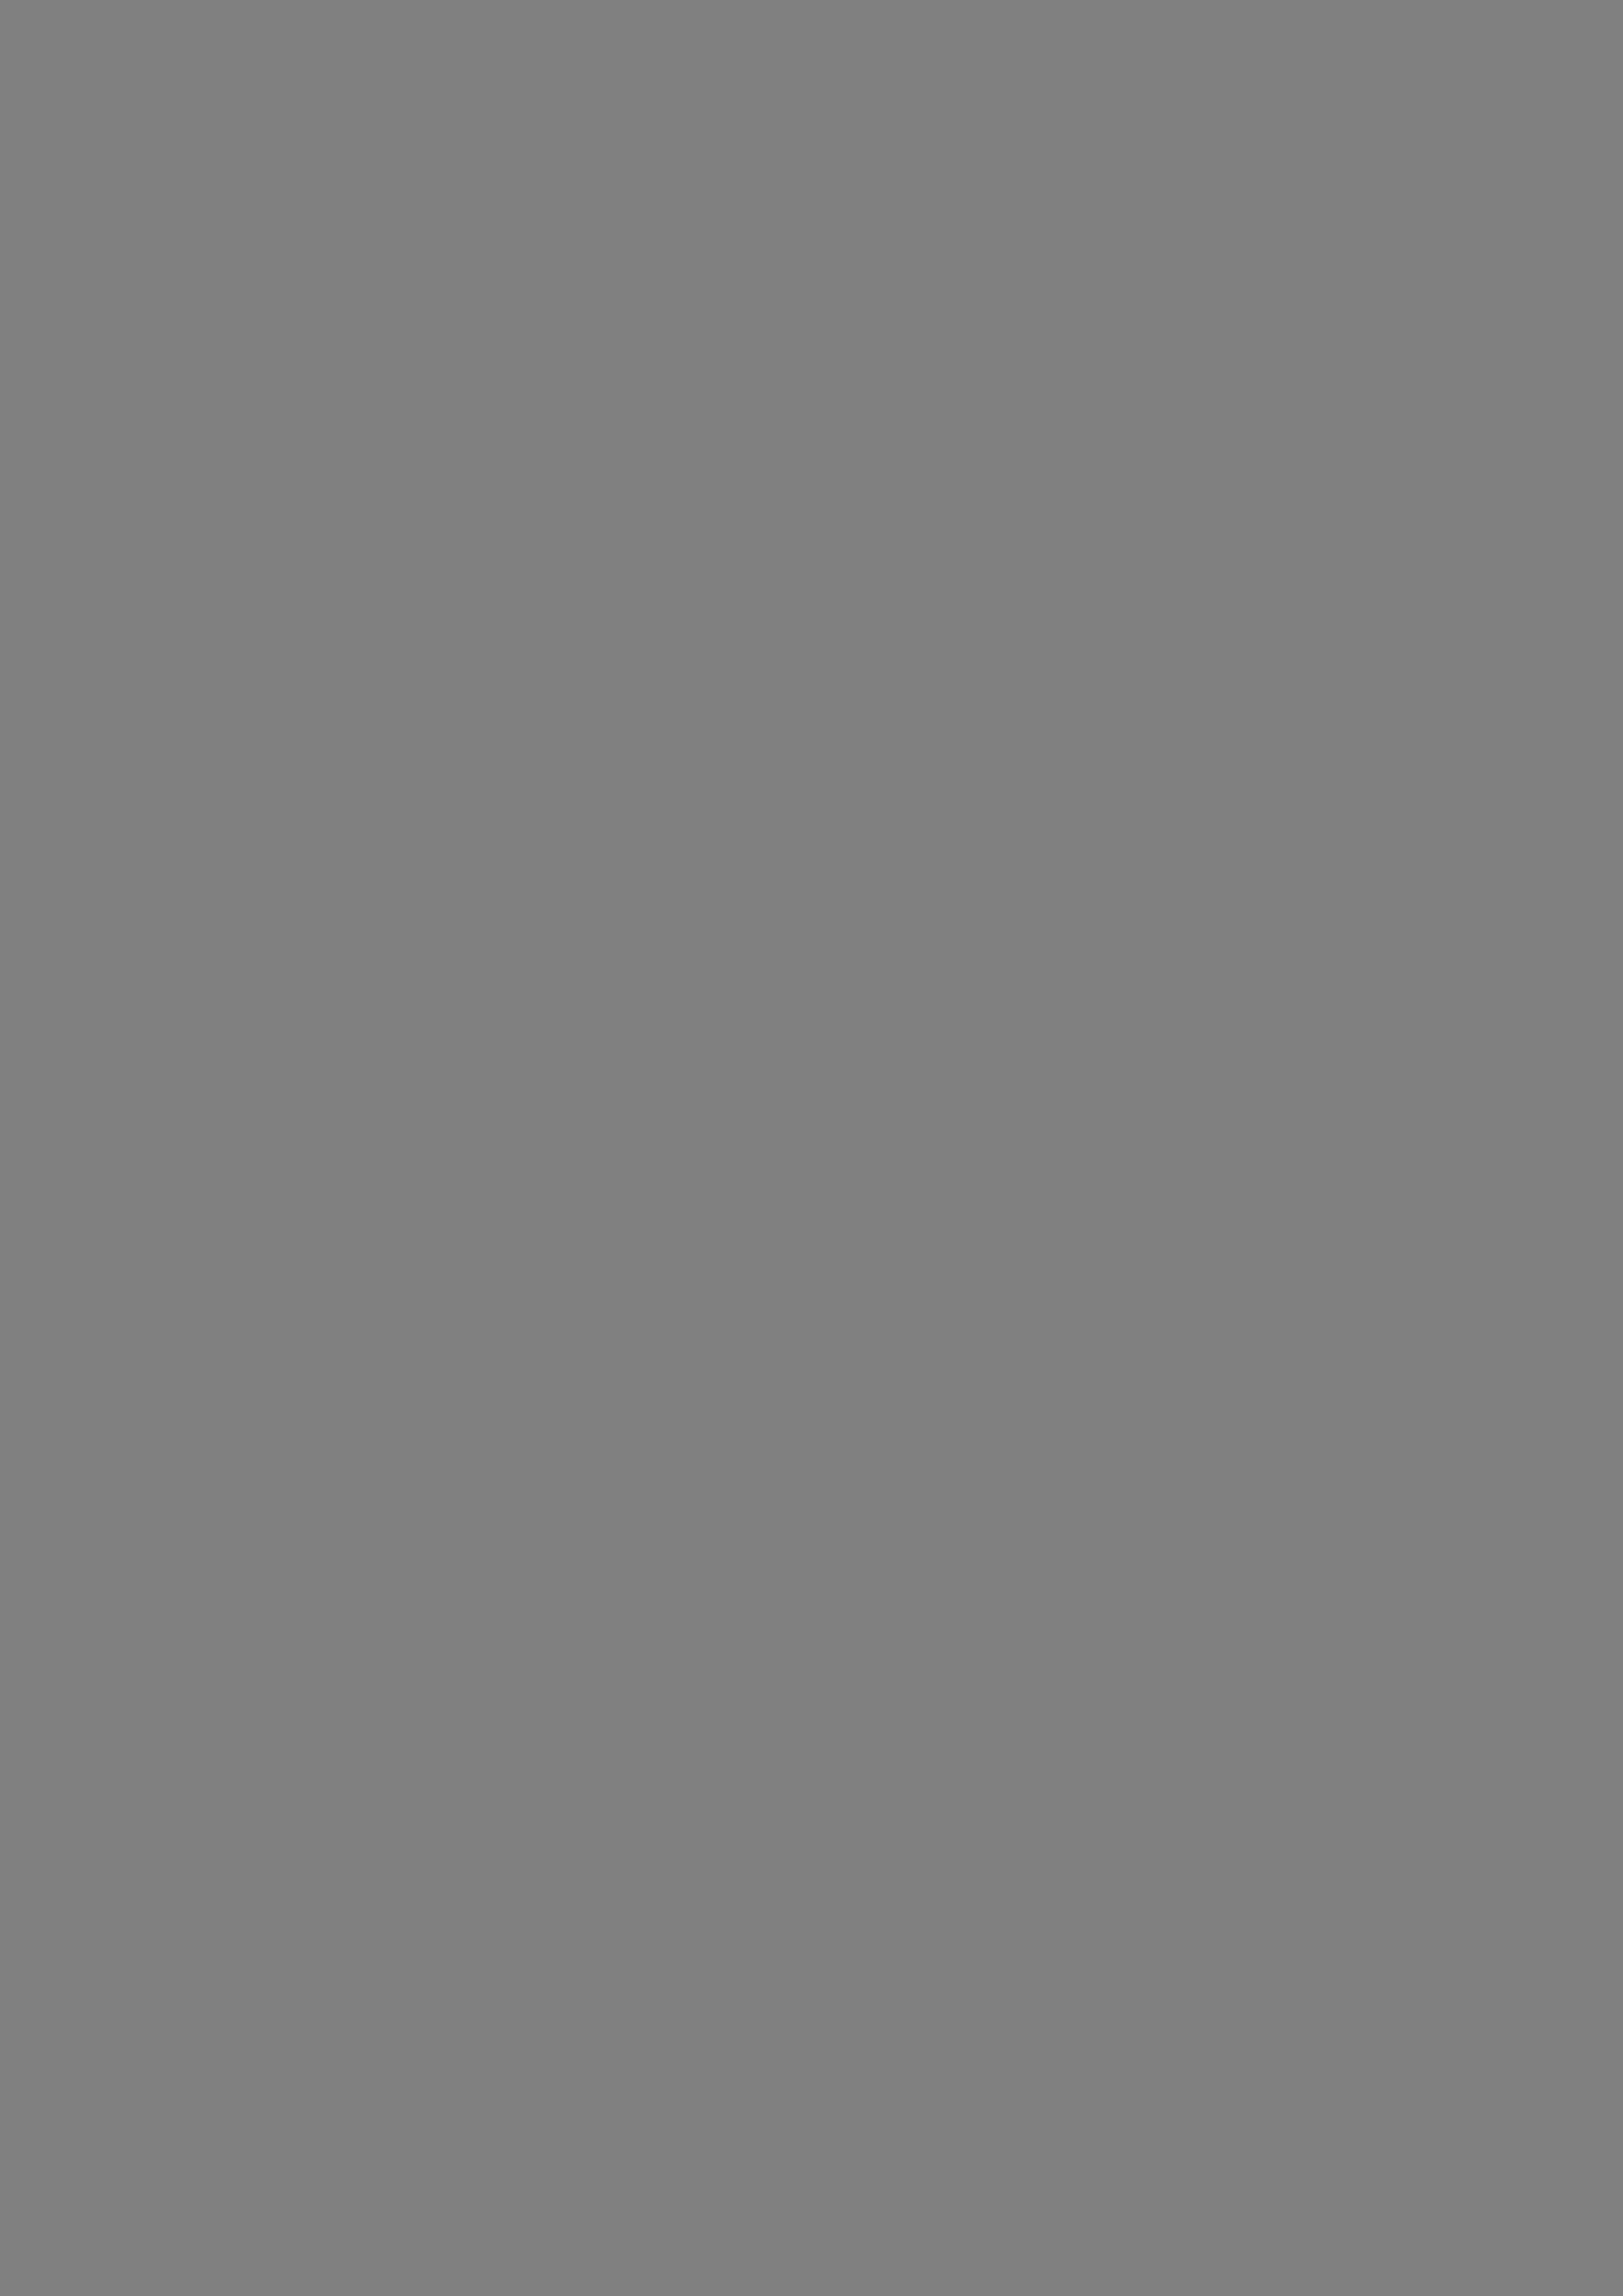 2480x3508 Gray Solid Color Background